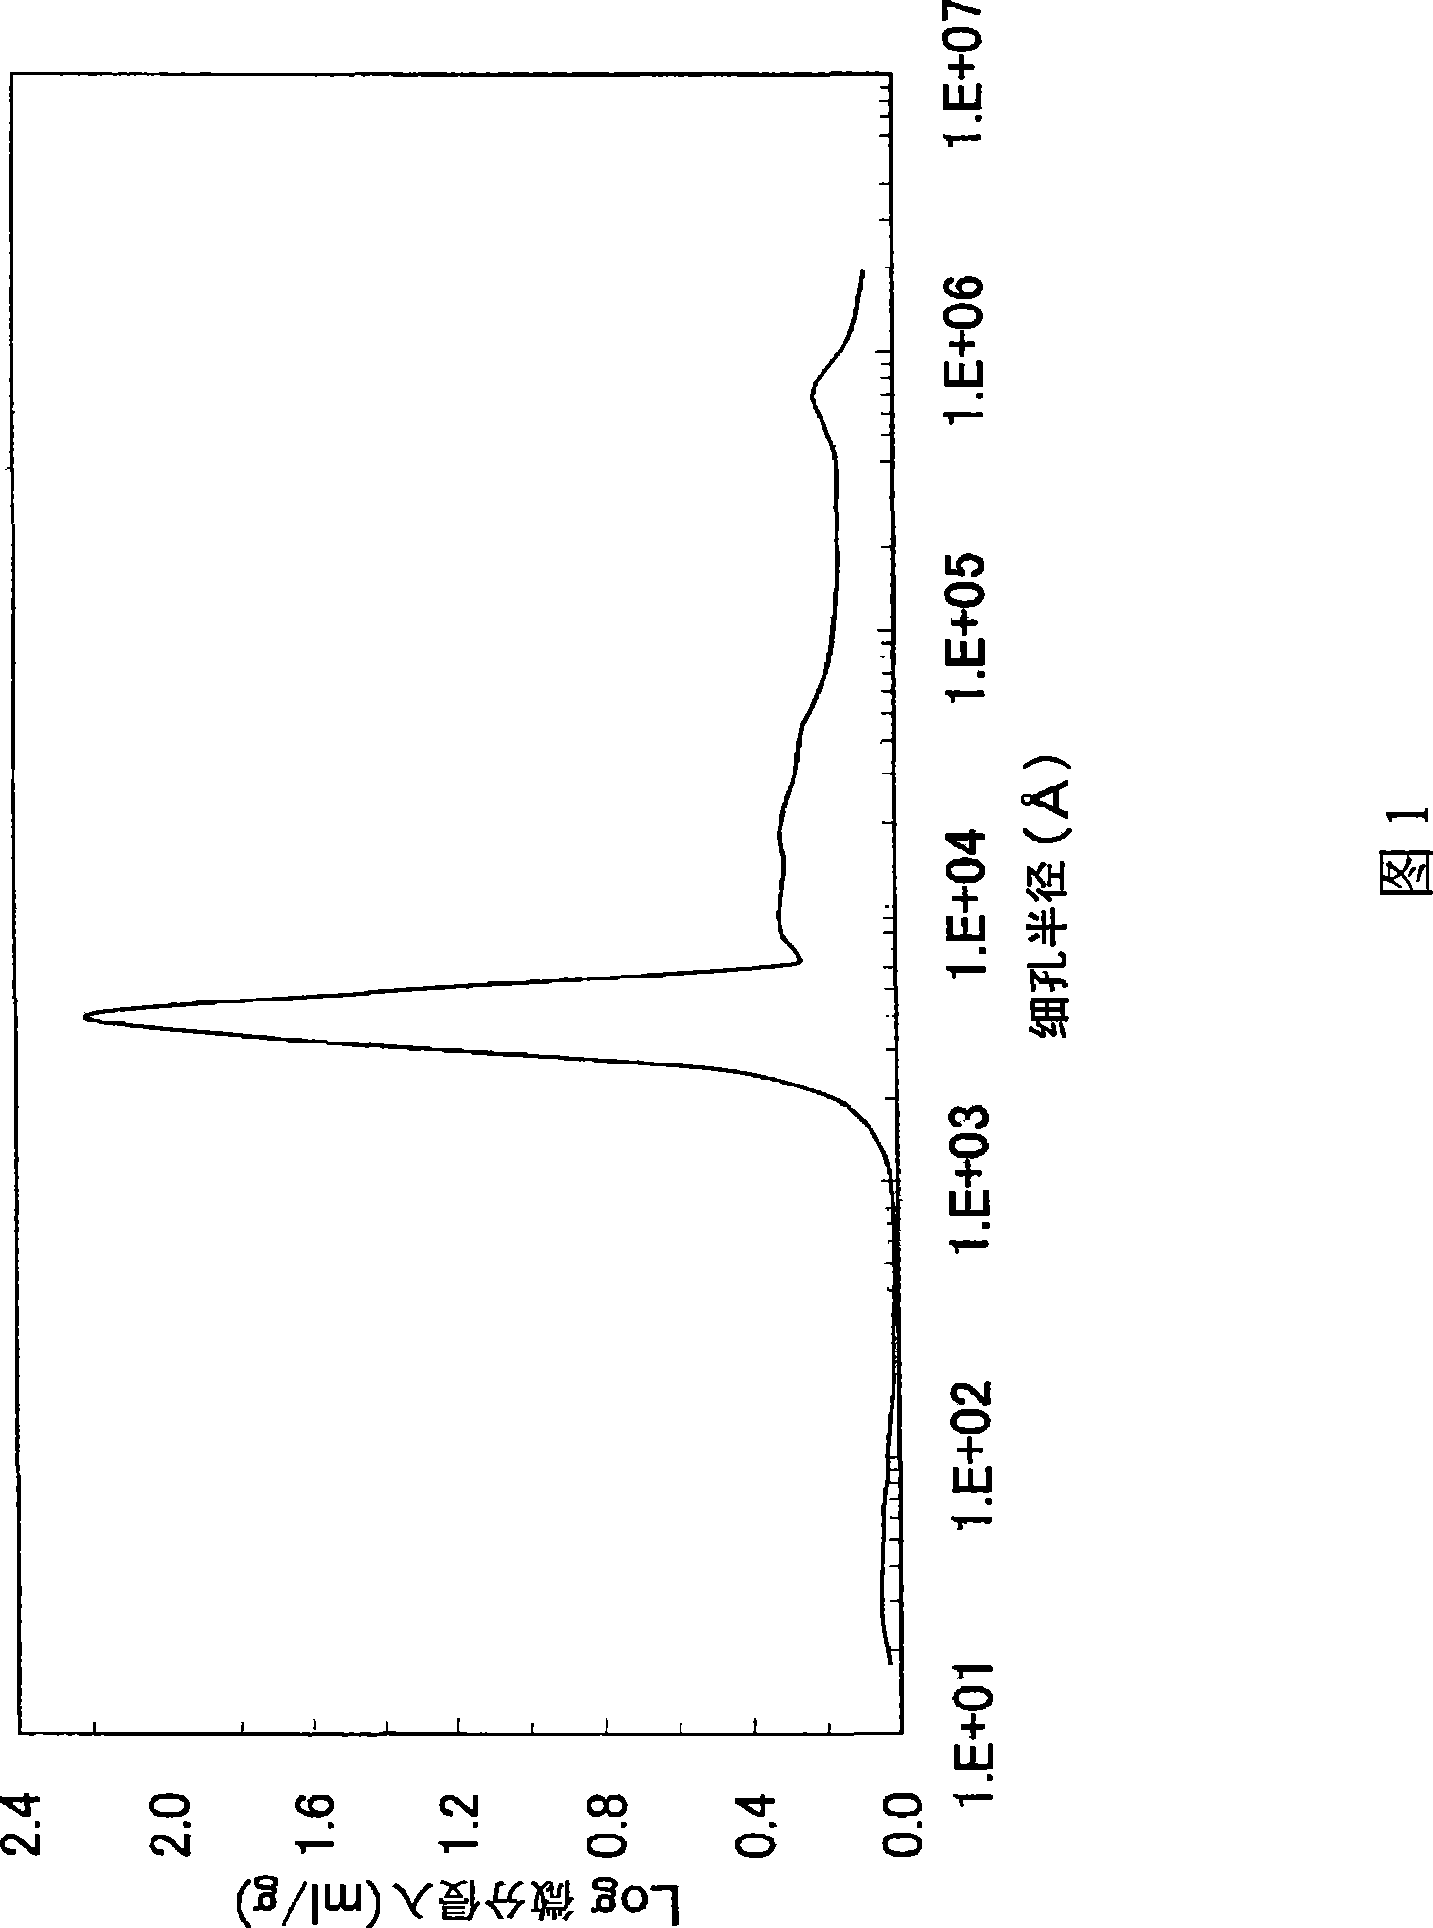 Lithium transition metal-based compound powder for positive electrode material in lithium rechargeable battery, method for manufacturing the powder, spray dried product of the powder, firing precursor